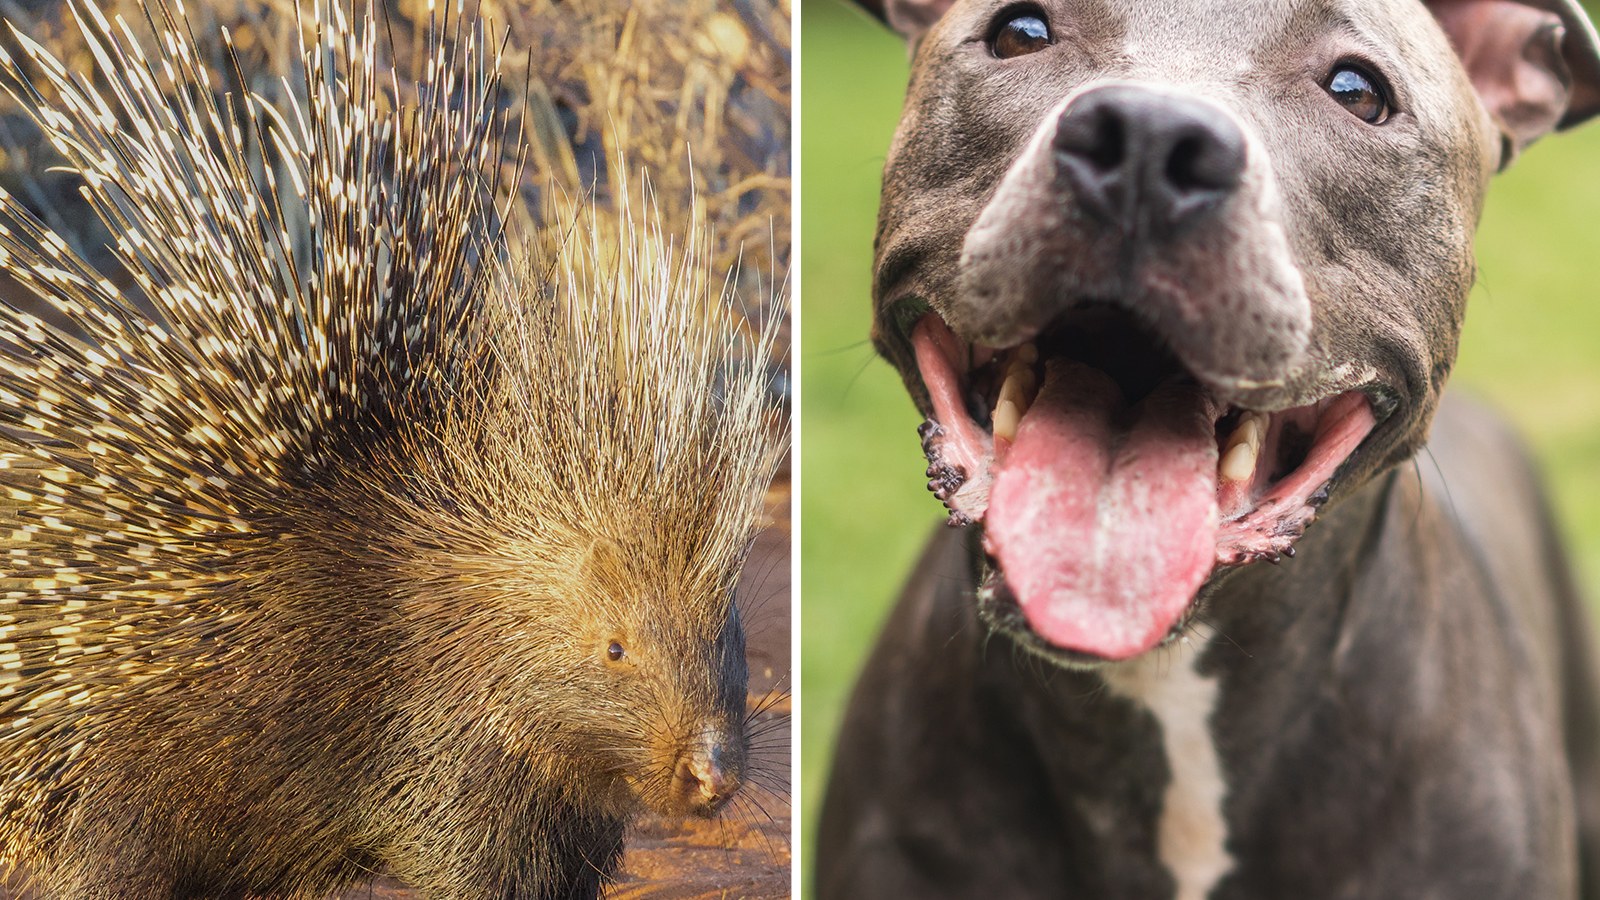 Pit Bull Dies After 2 A.M. Tussle With Porcupine Leaves Quills Inside Body